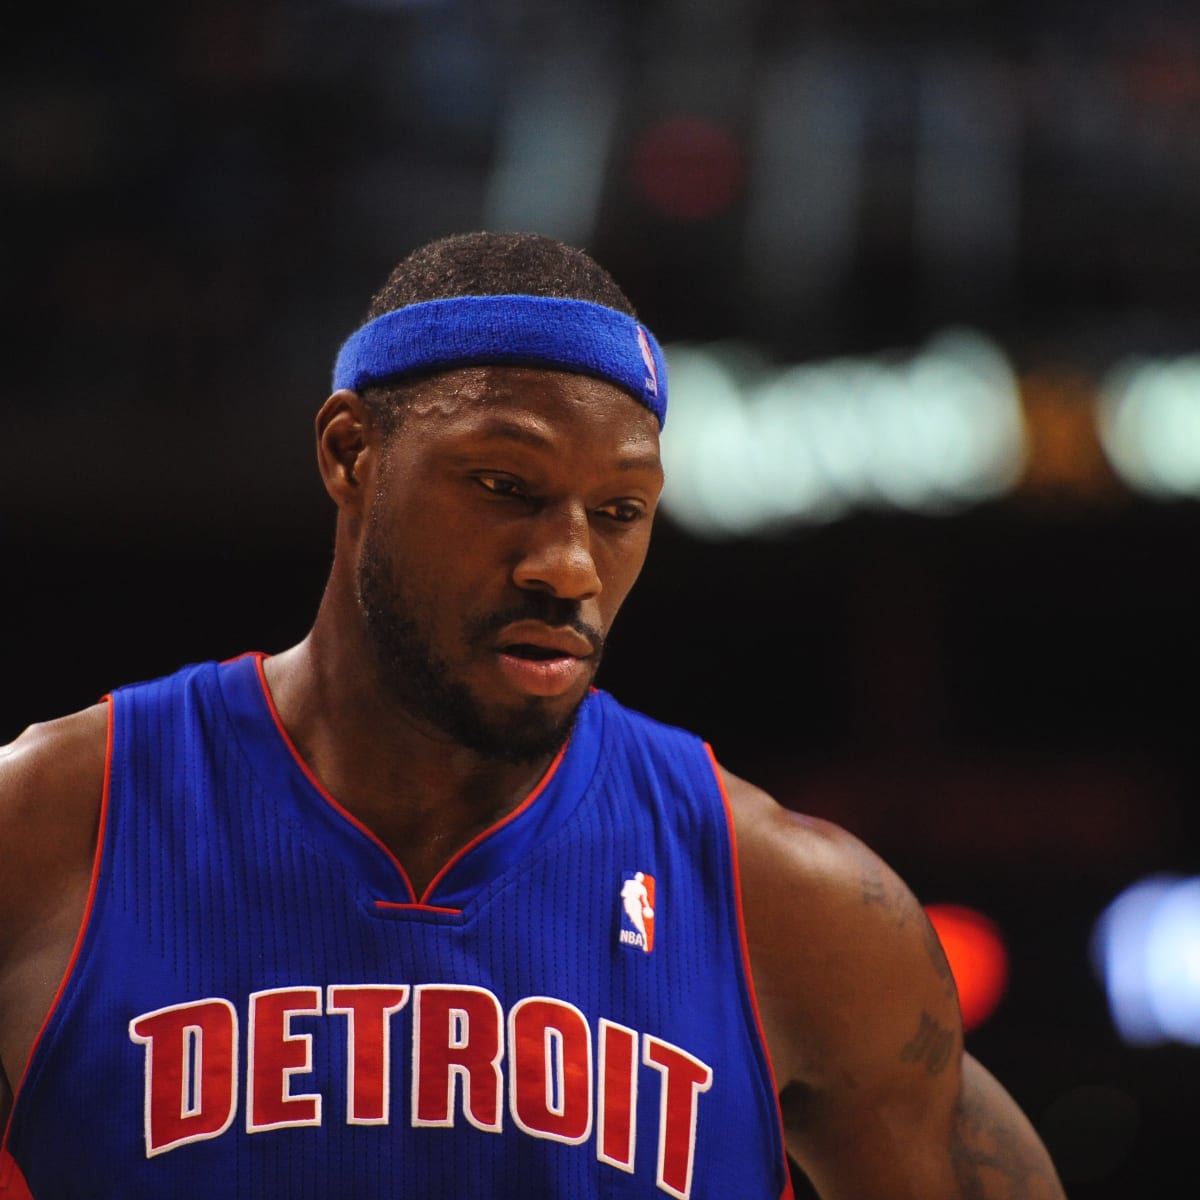 Defense, hustle carry Detroit Pistons' Ben Wallace into Hall of Fame